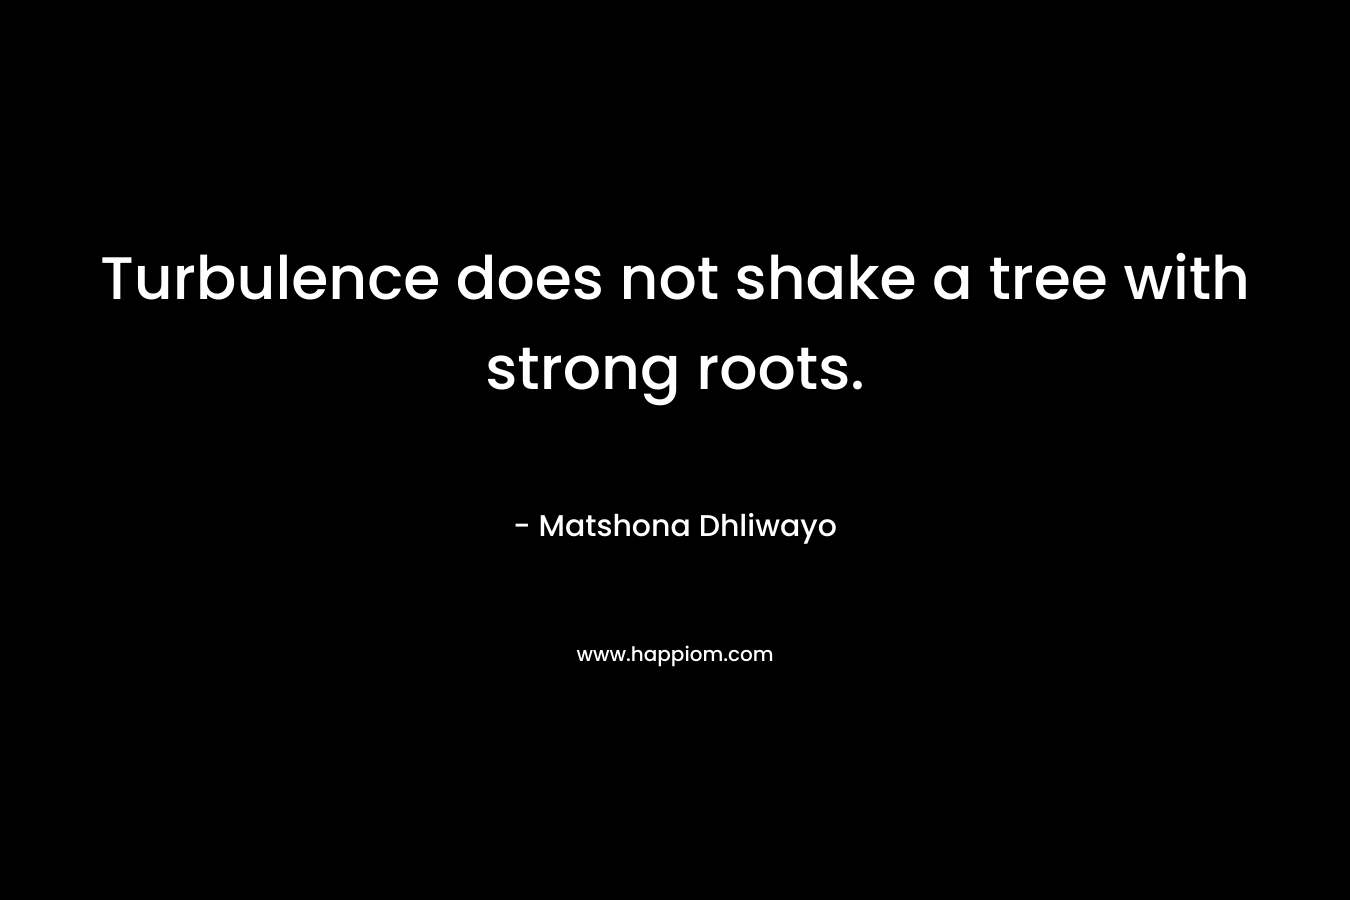 Turbulence does not shake a tree with strong roots.